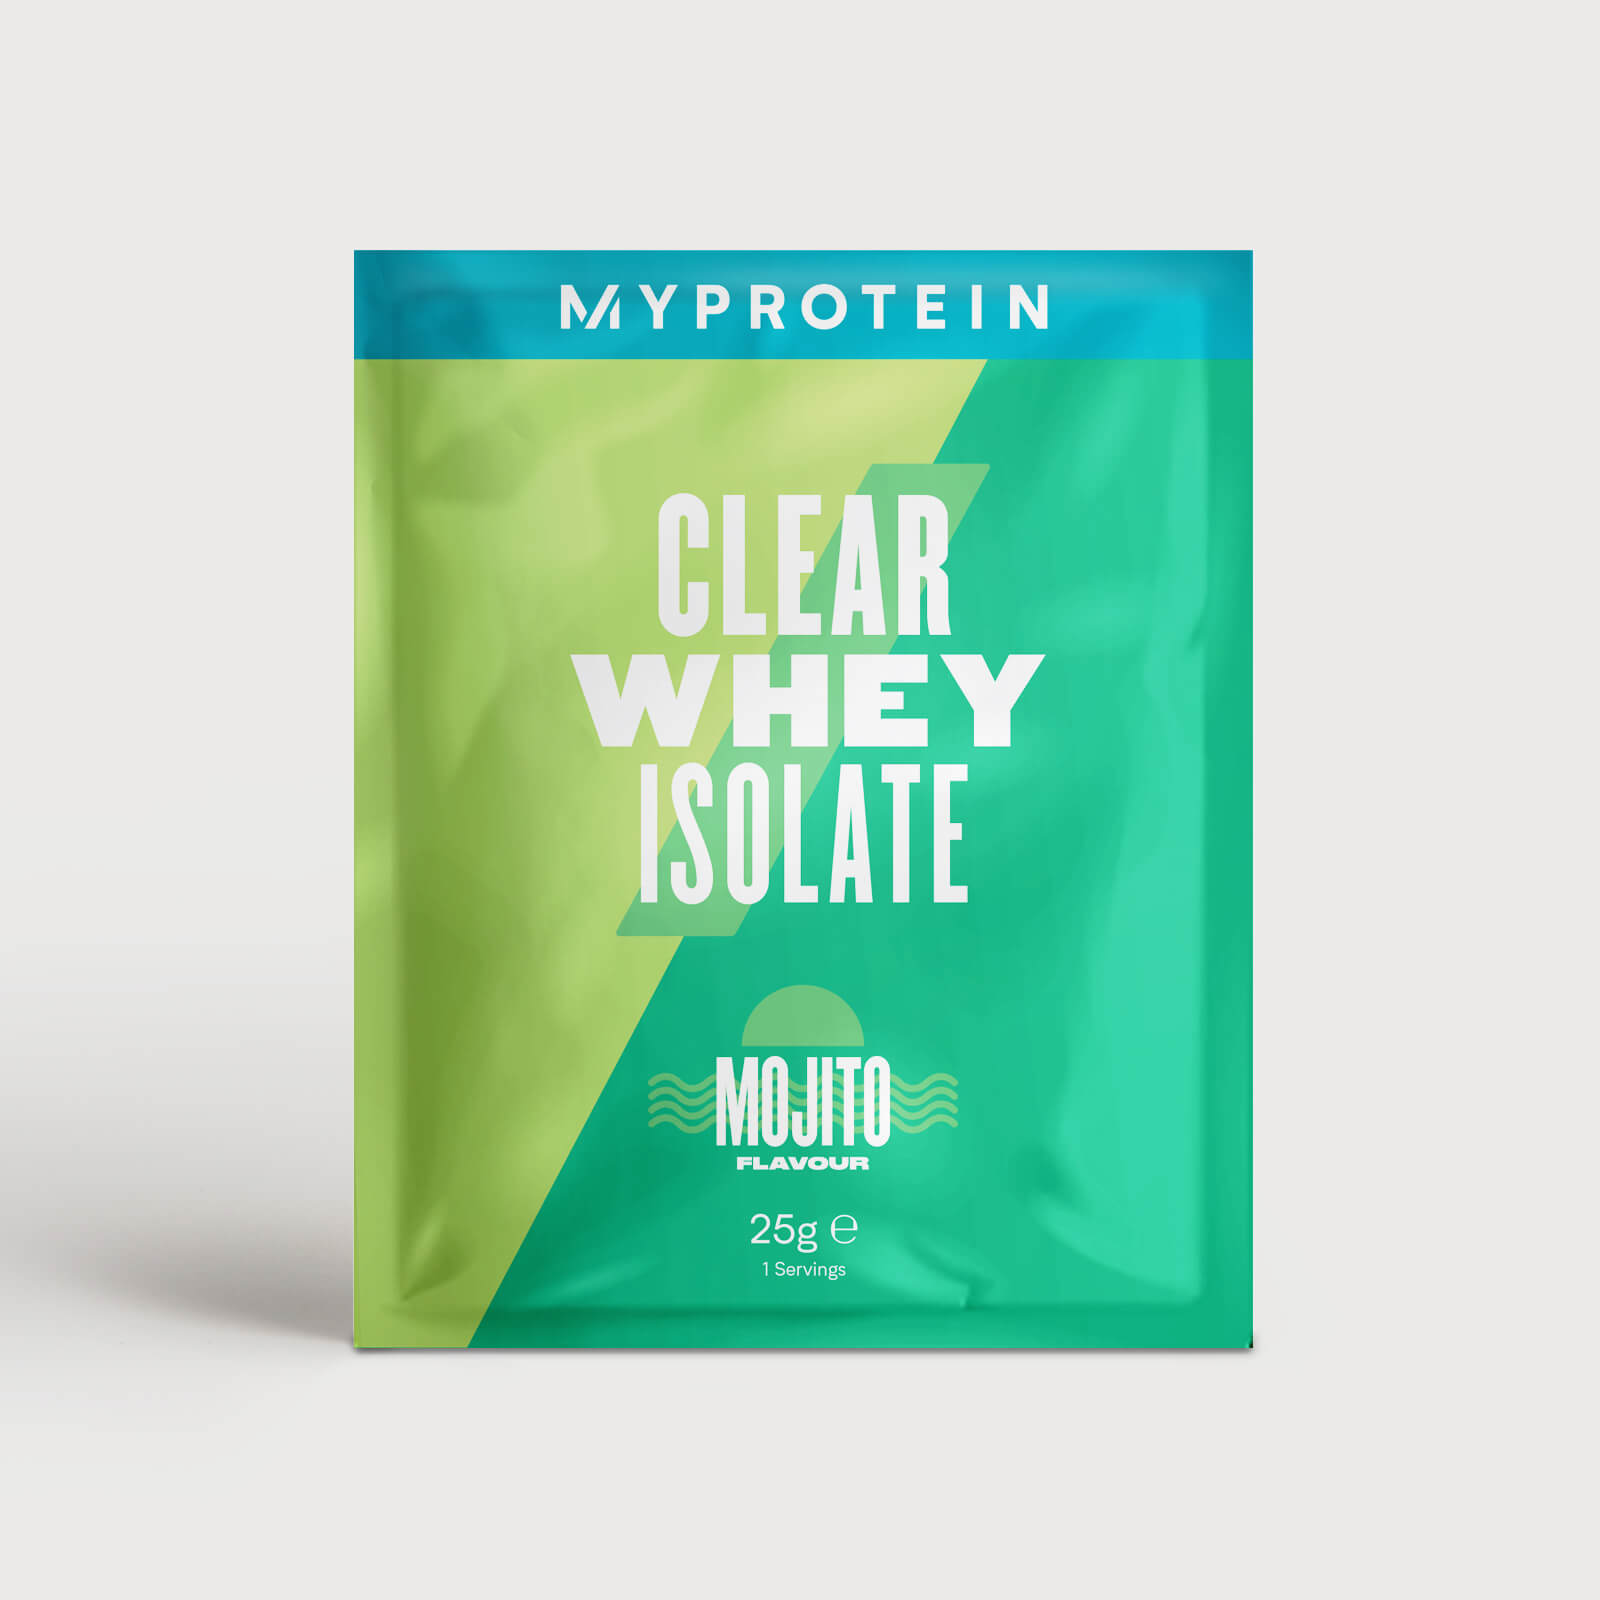 Myprotein Clear Whey Isolate (Sample) - 25g - Mojito